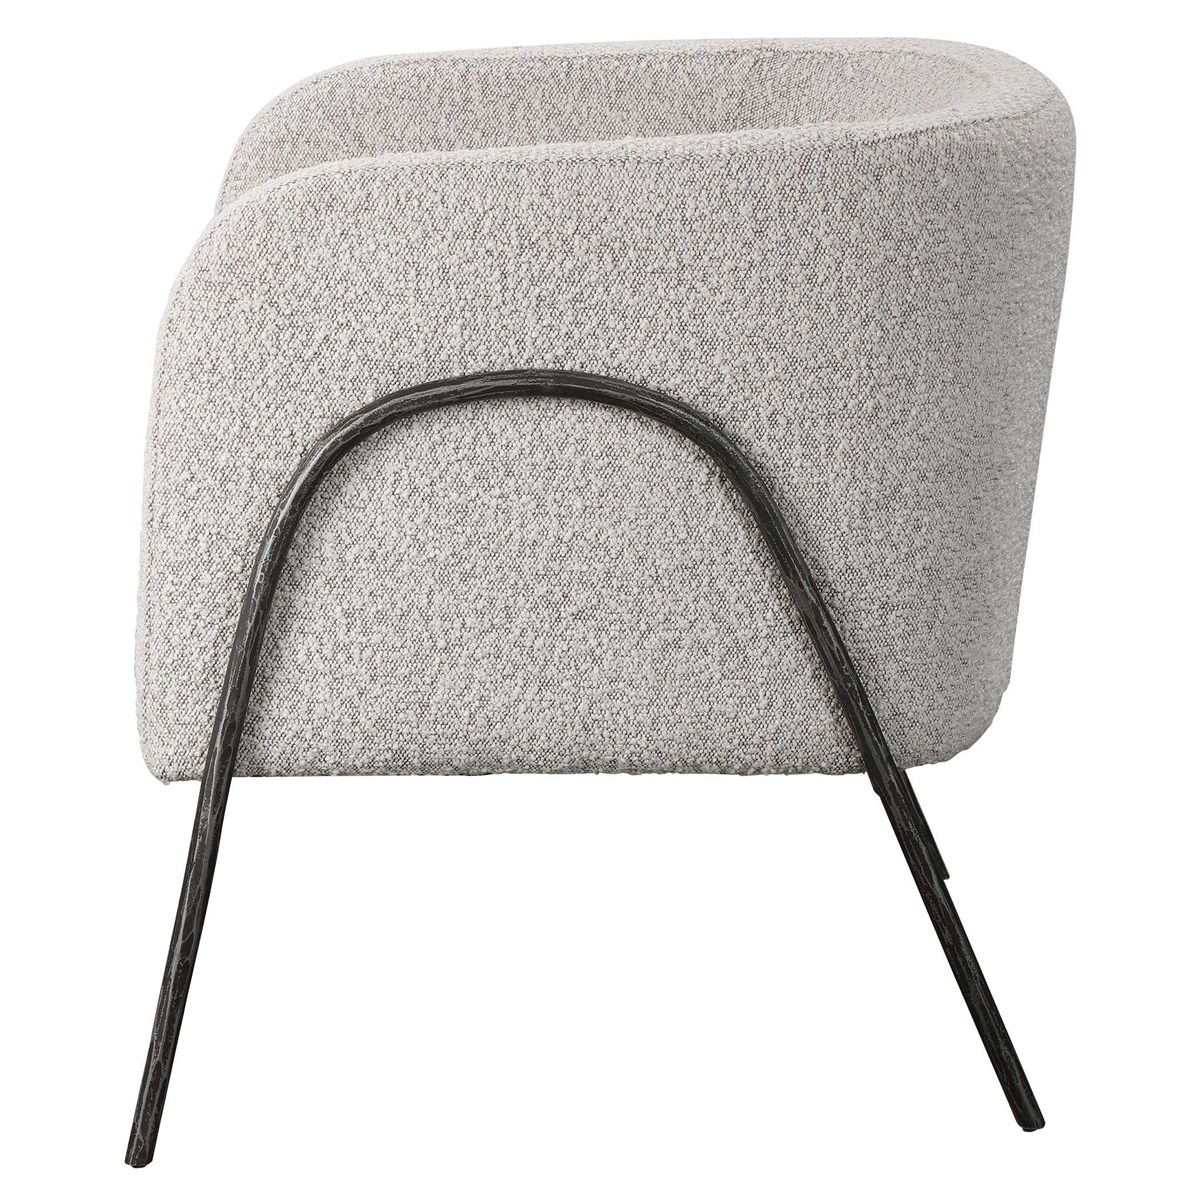 Jacobsen Accent Chair - Image 4